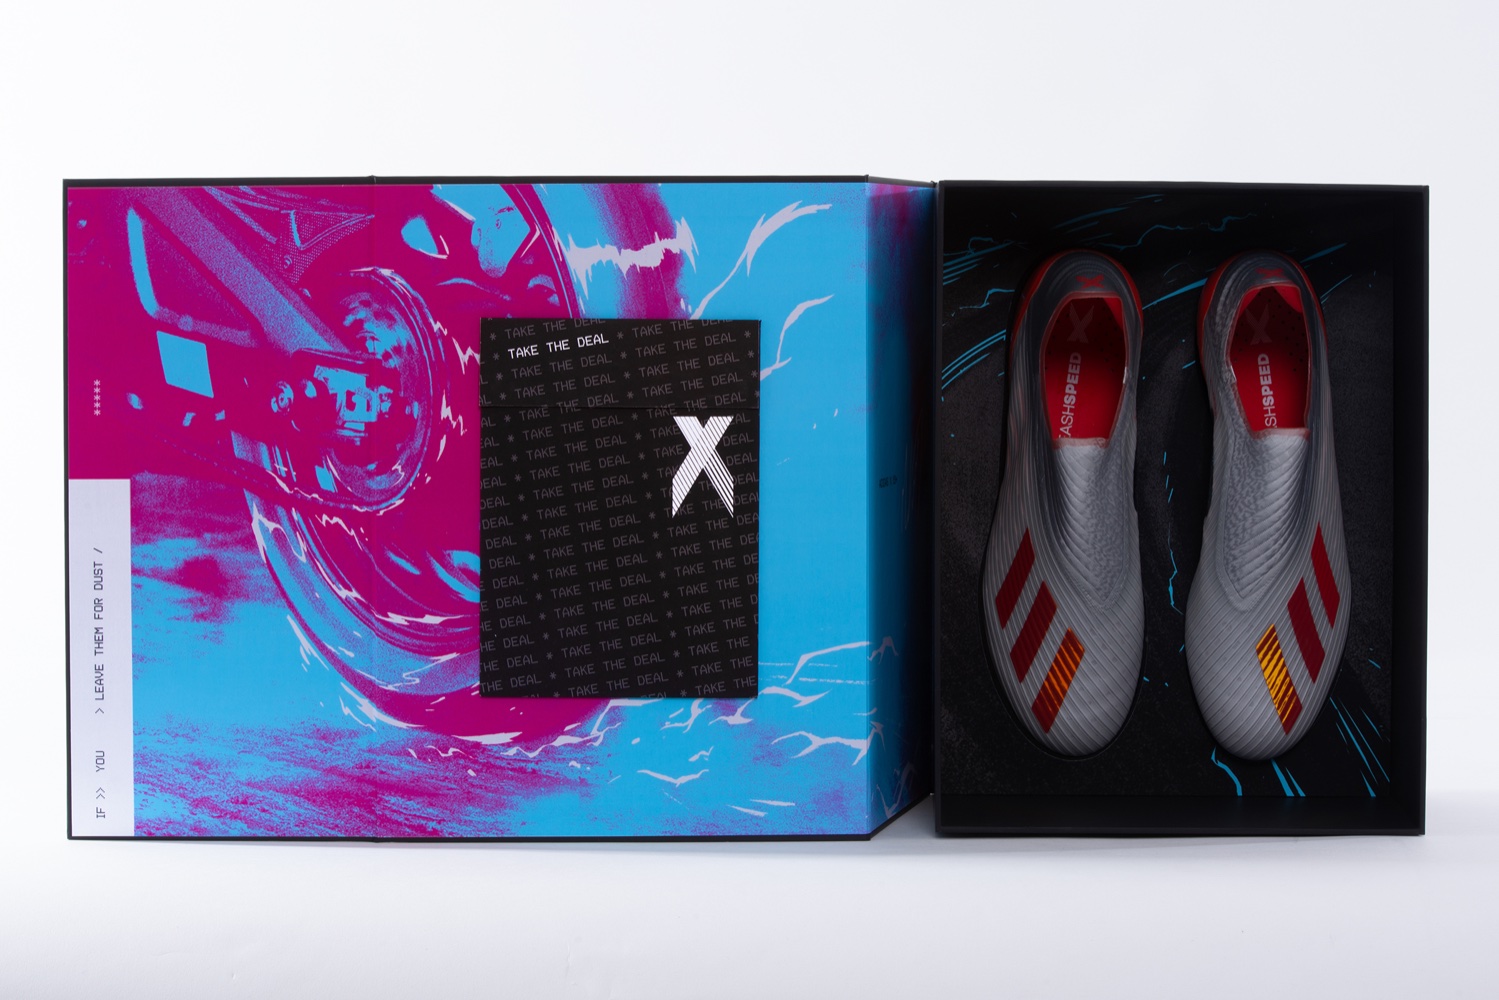 Football Boots Or Soccer Cleats? Who Cares, We Love This Adidas Packaging